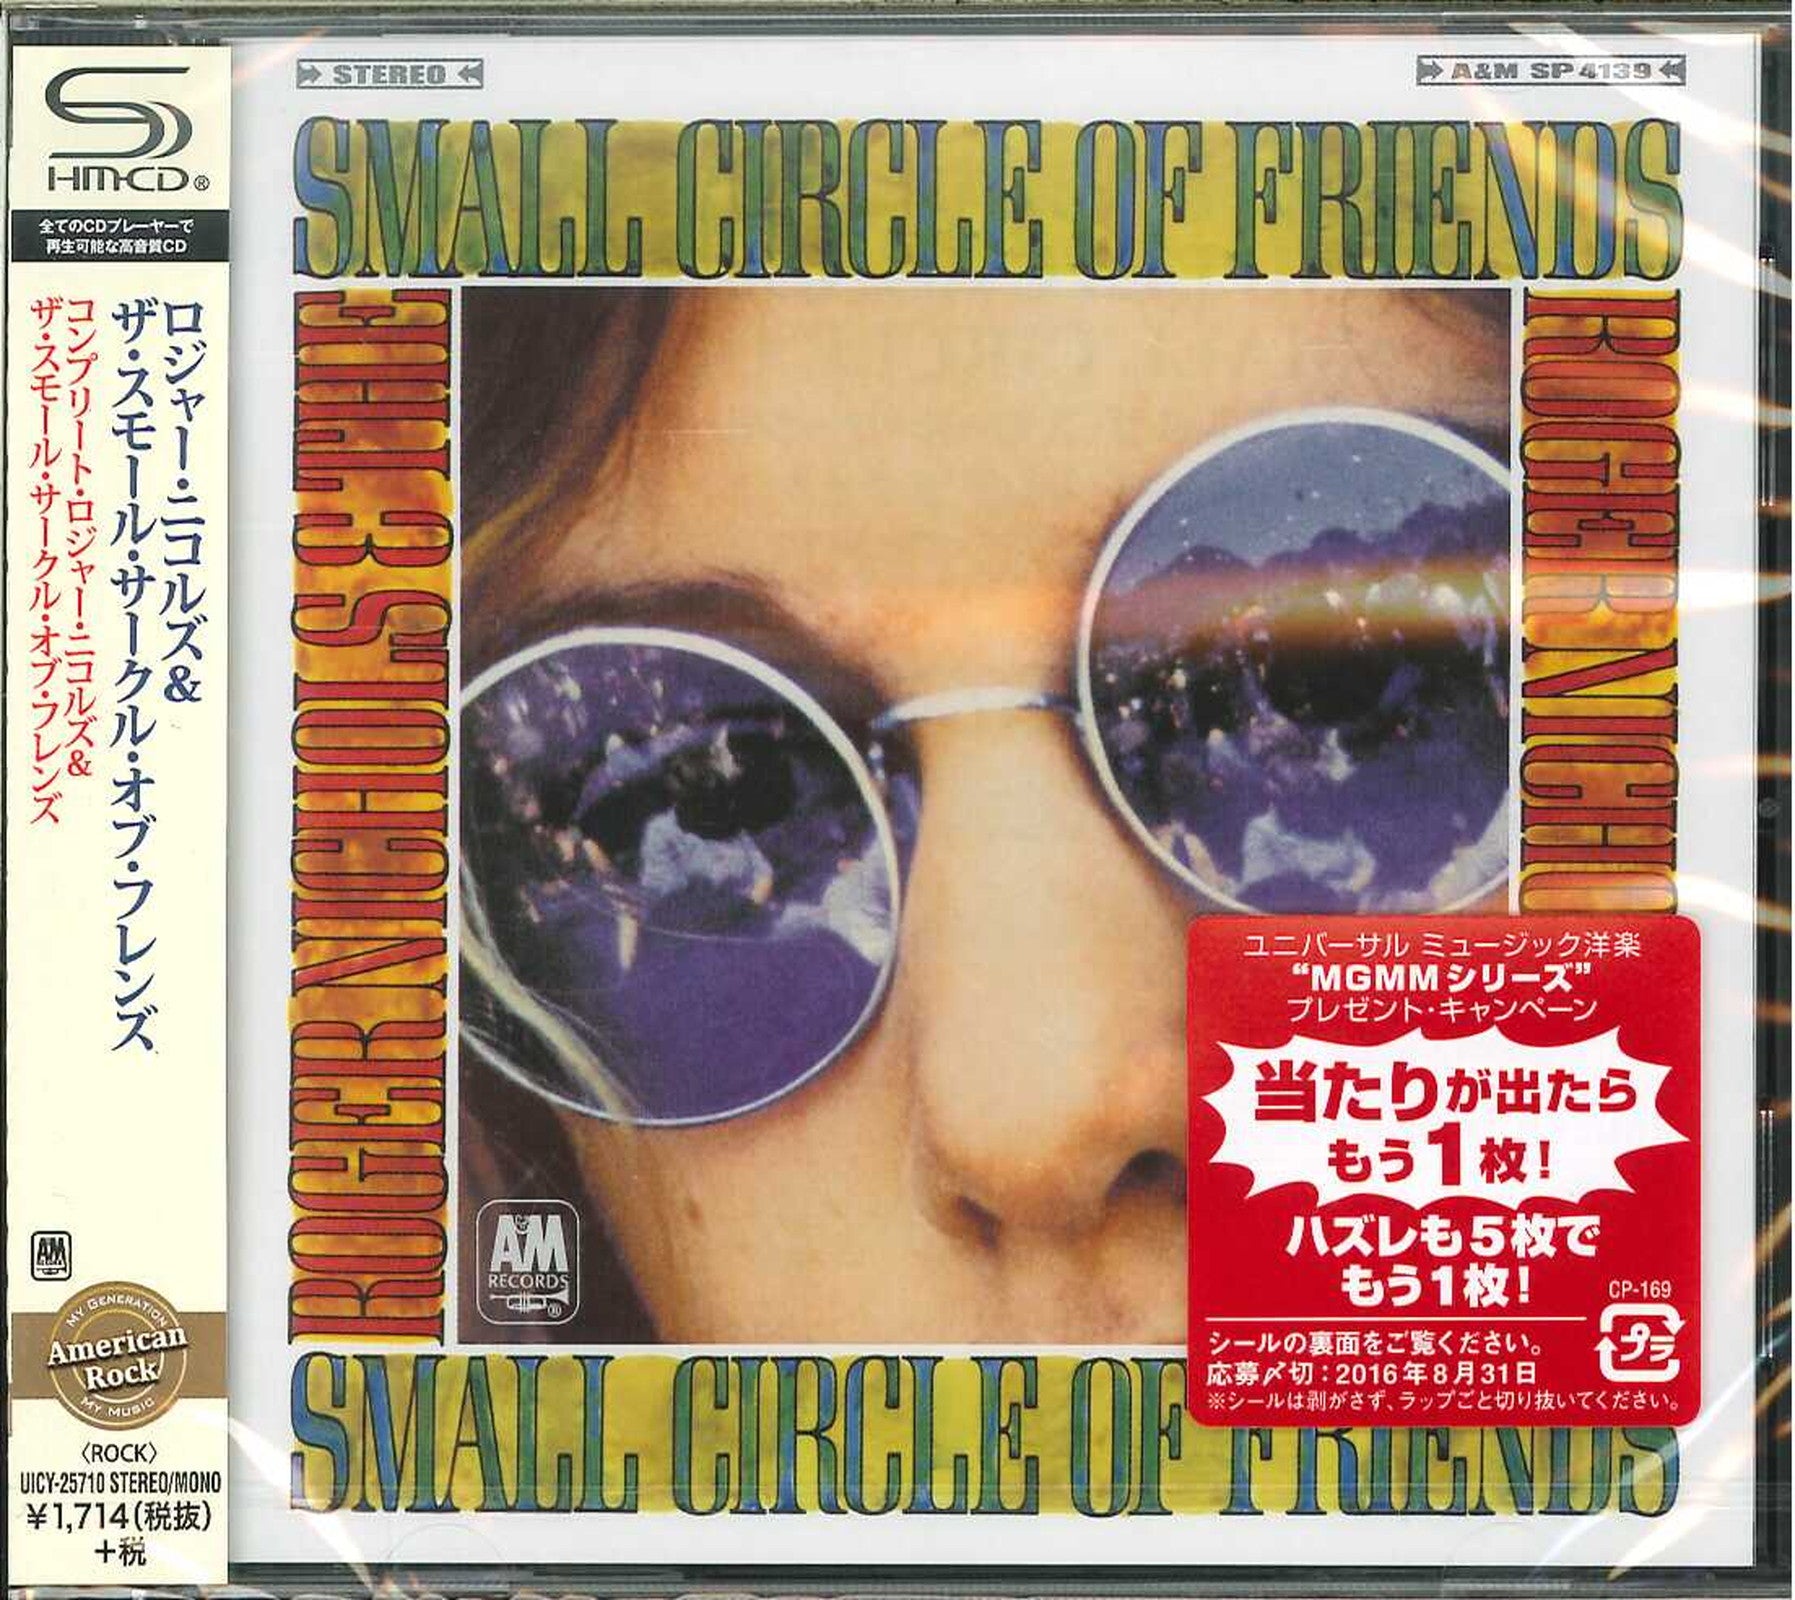 Roger Nichols & The Small Circle Of Friends - The Complete Roger